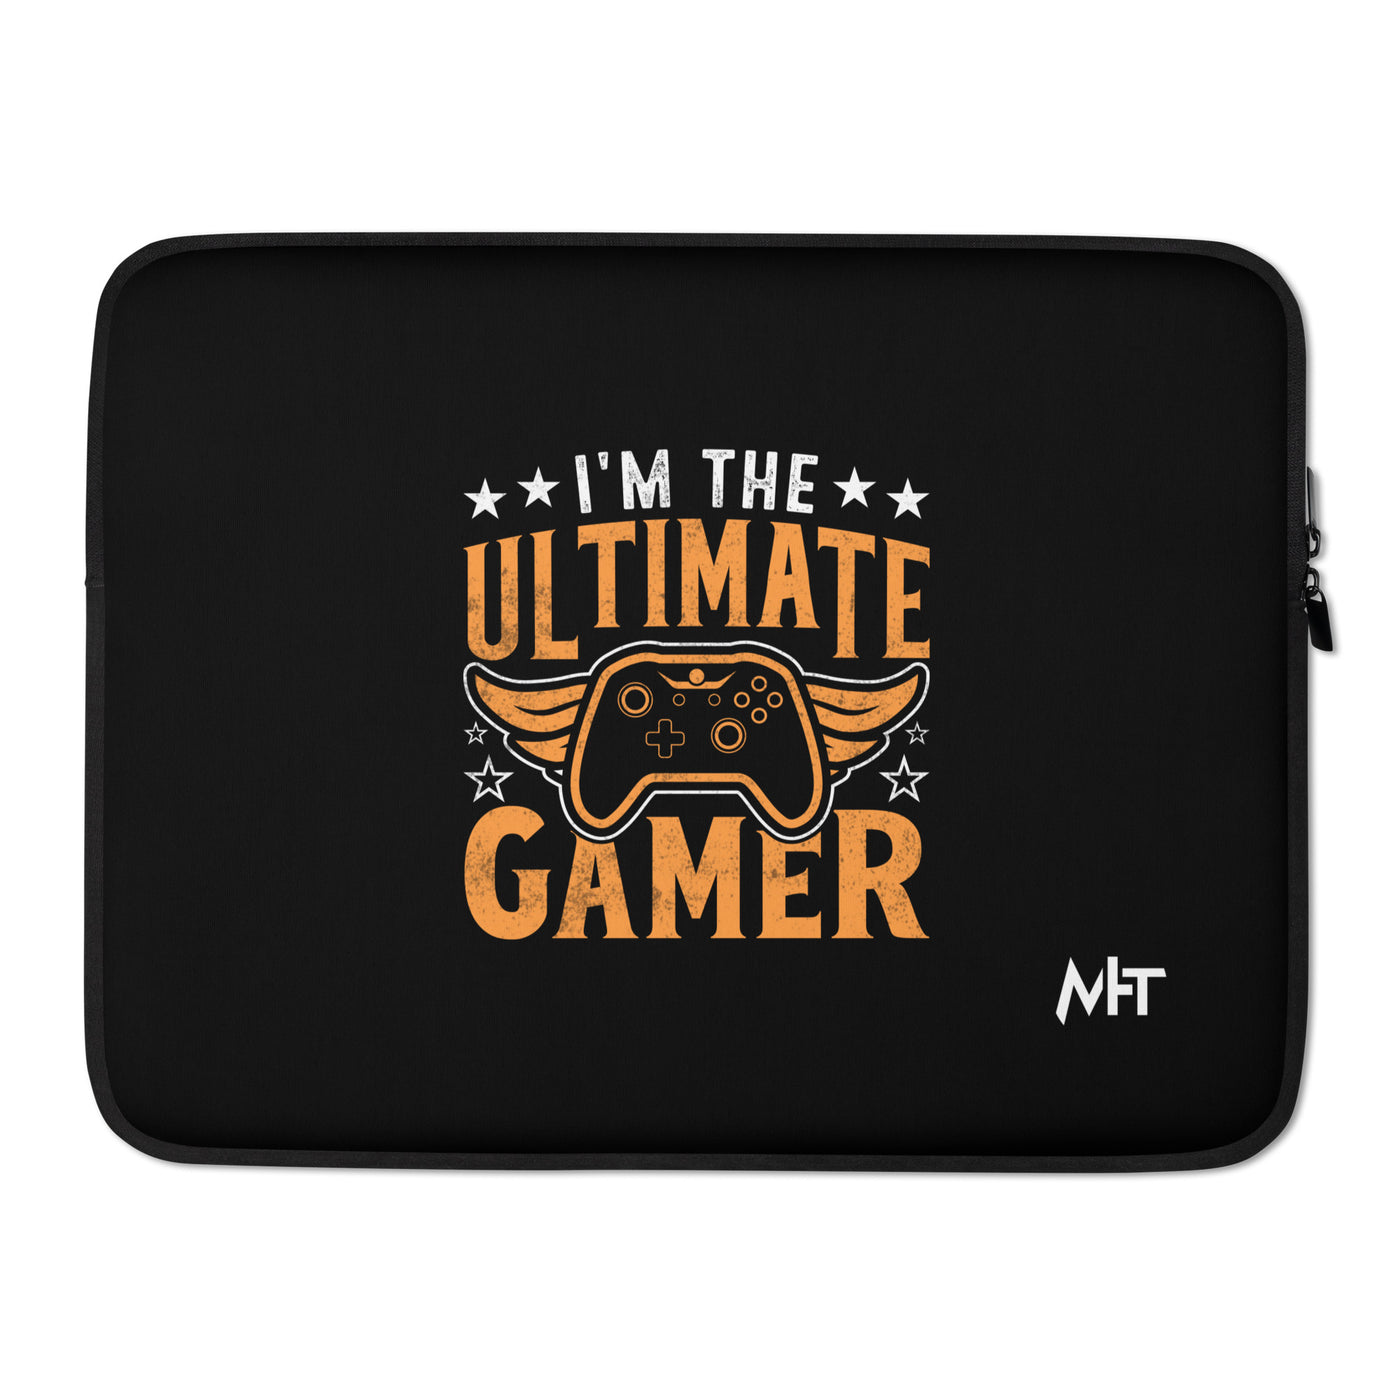 I am the Ultimate Gamer - Laptop Sleeve